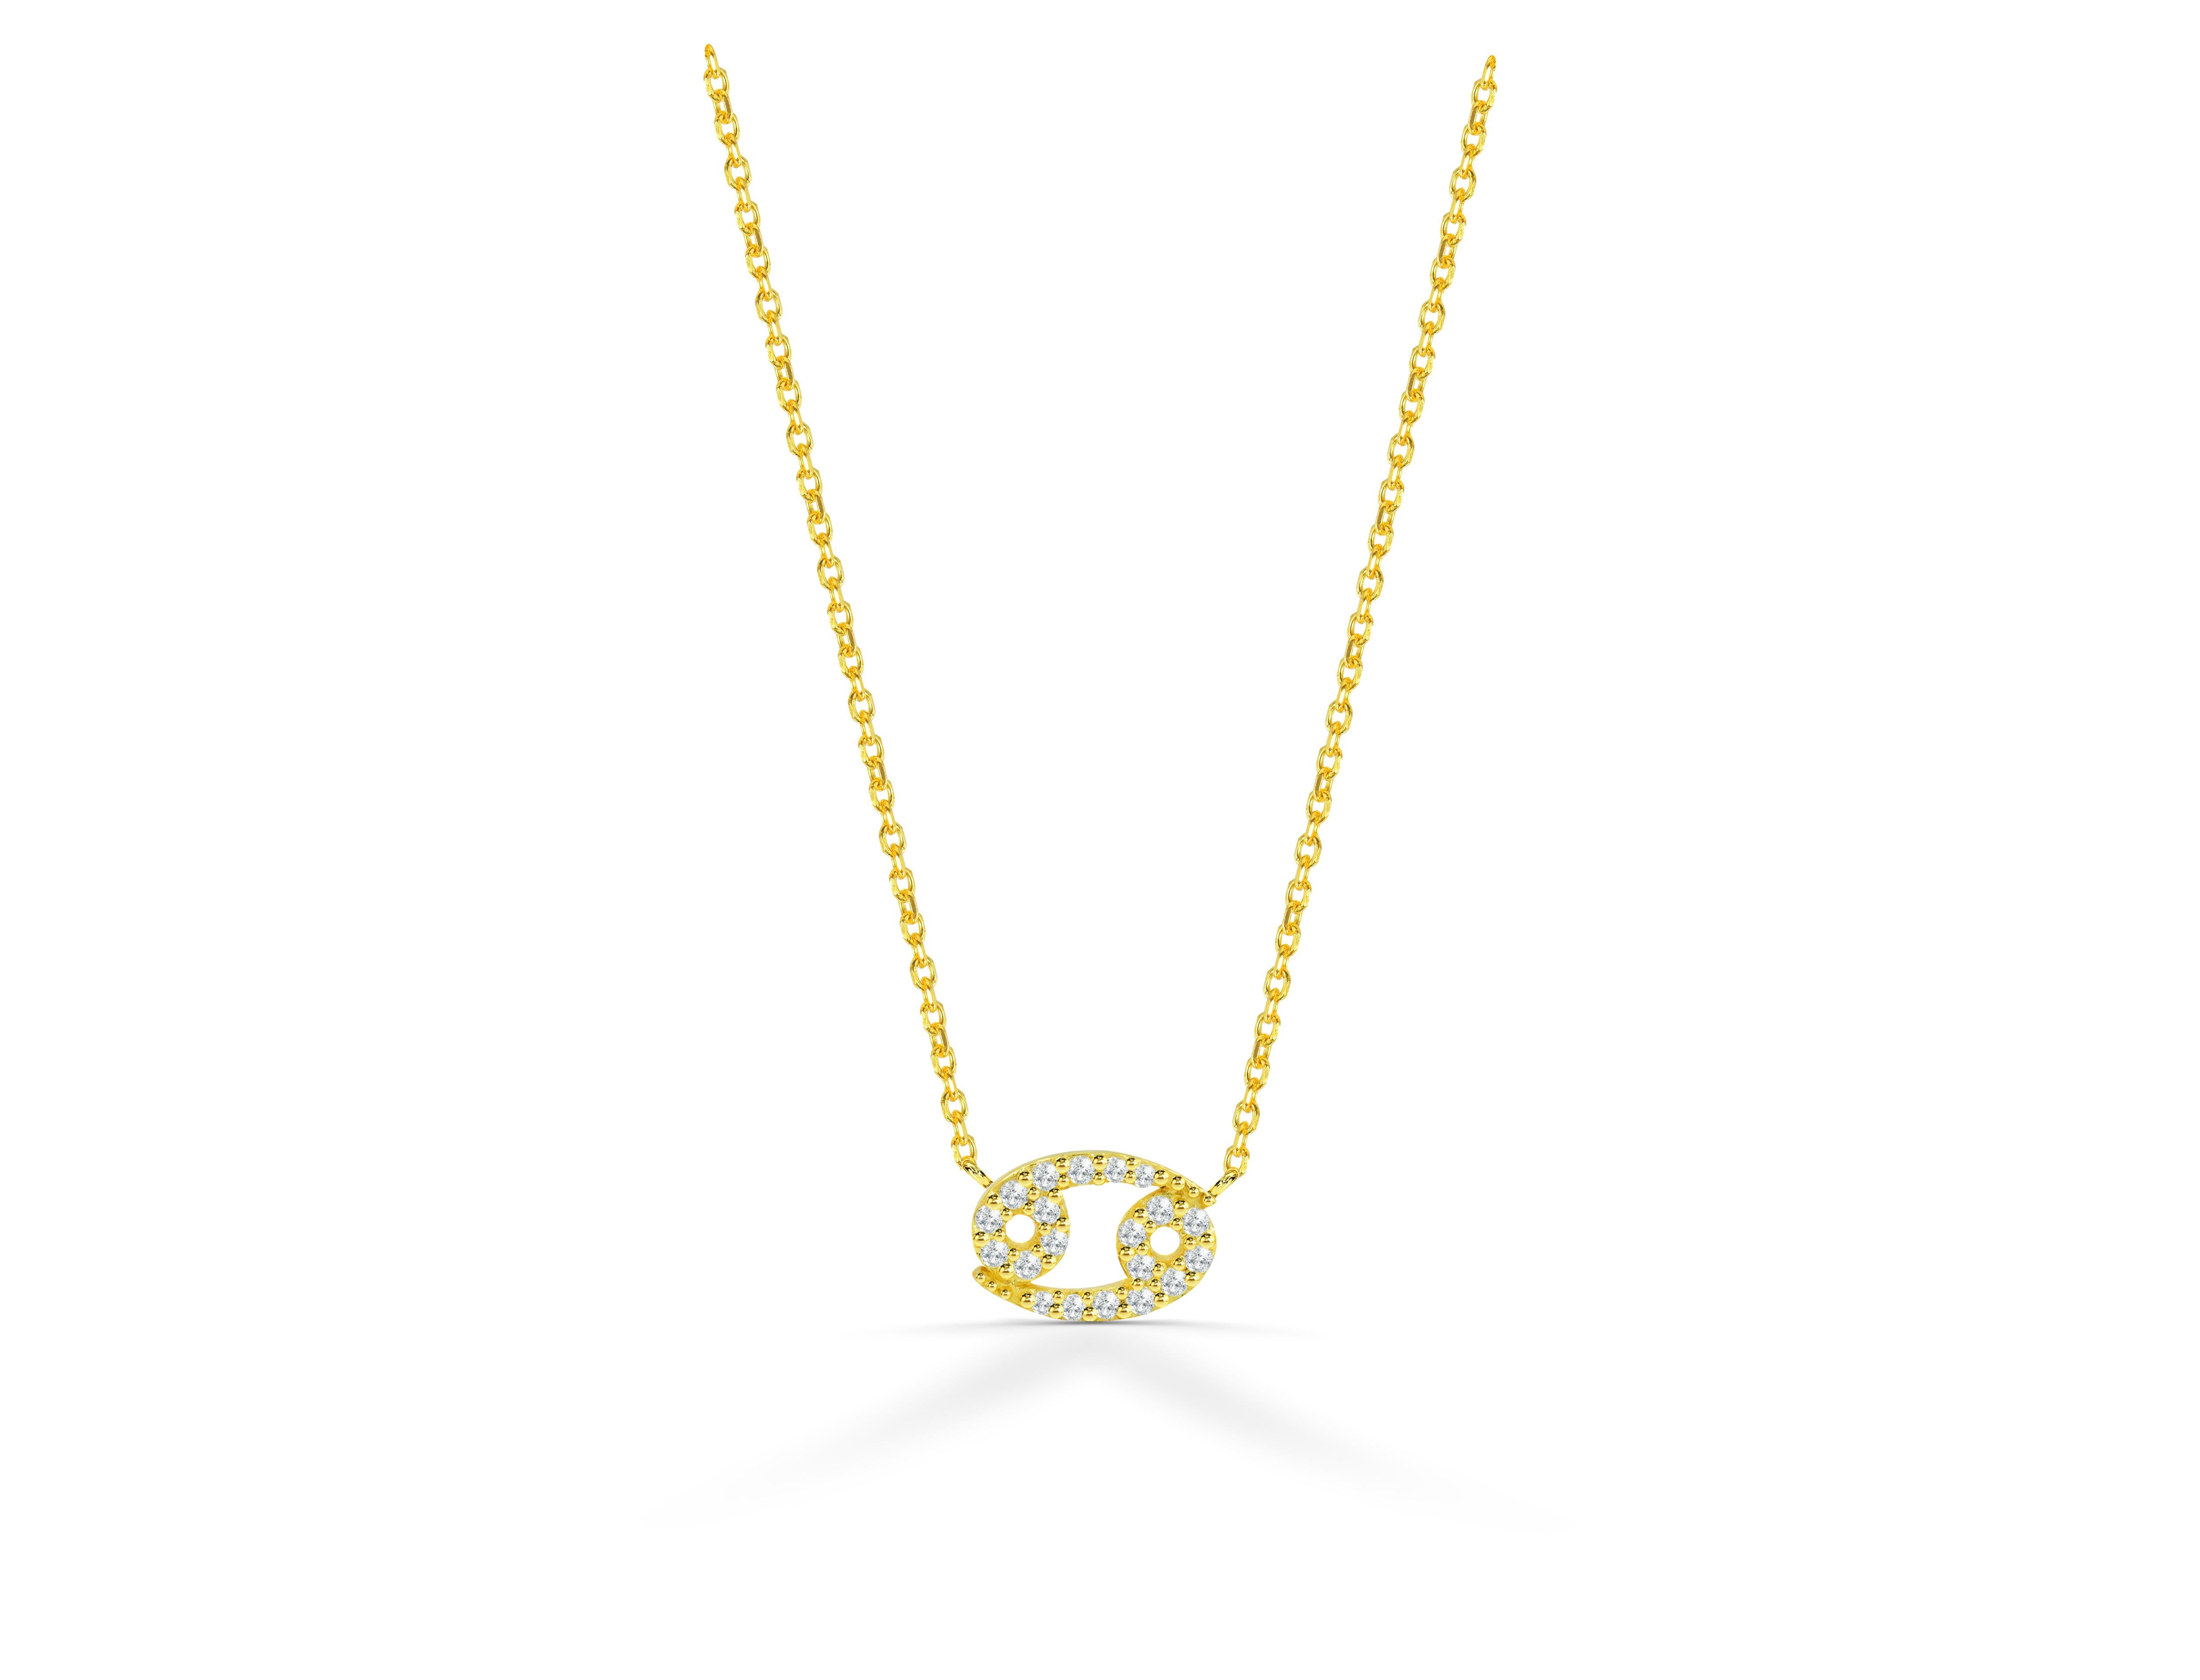 Beautiful and Sparkly Diamond Cancer Necklace is made of 14k solid gold.
Available in three colors of gold:  Rose Gold / White Gold / Yellow Gold.

Natural genuine round cut diamond each diamond is hand selected by me to ensure quality and set by a